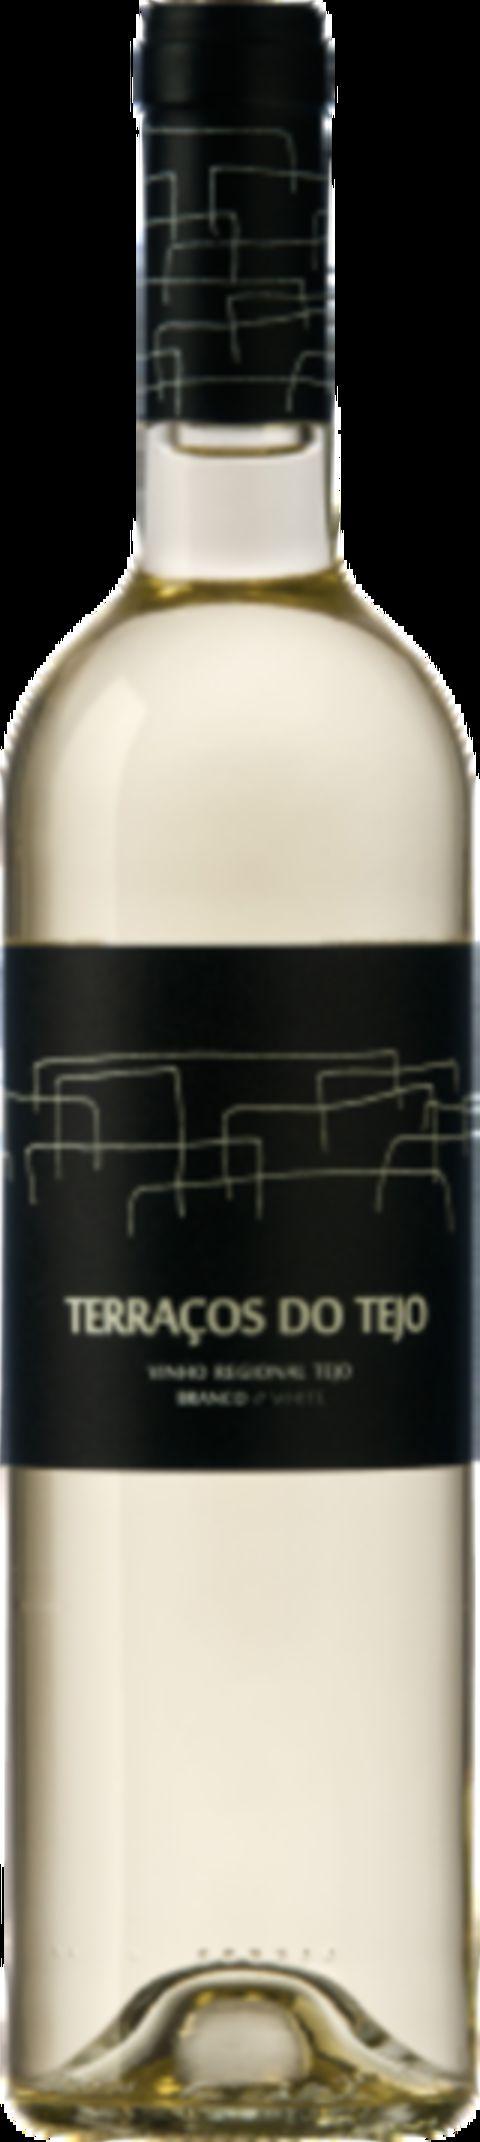 Terraços do Tejo Red A new international styled red wine from Quinta do Casal da Coelheira. With elegant fruit on the nose and an attractive spicyness.